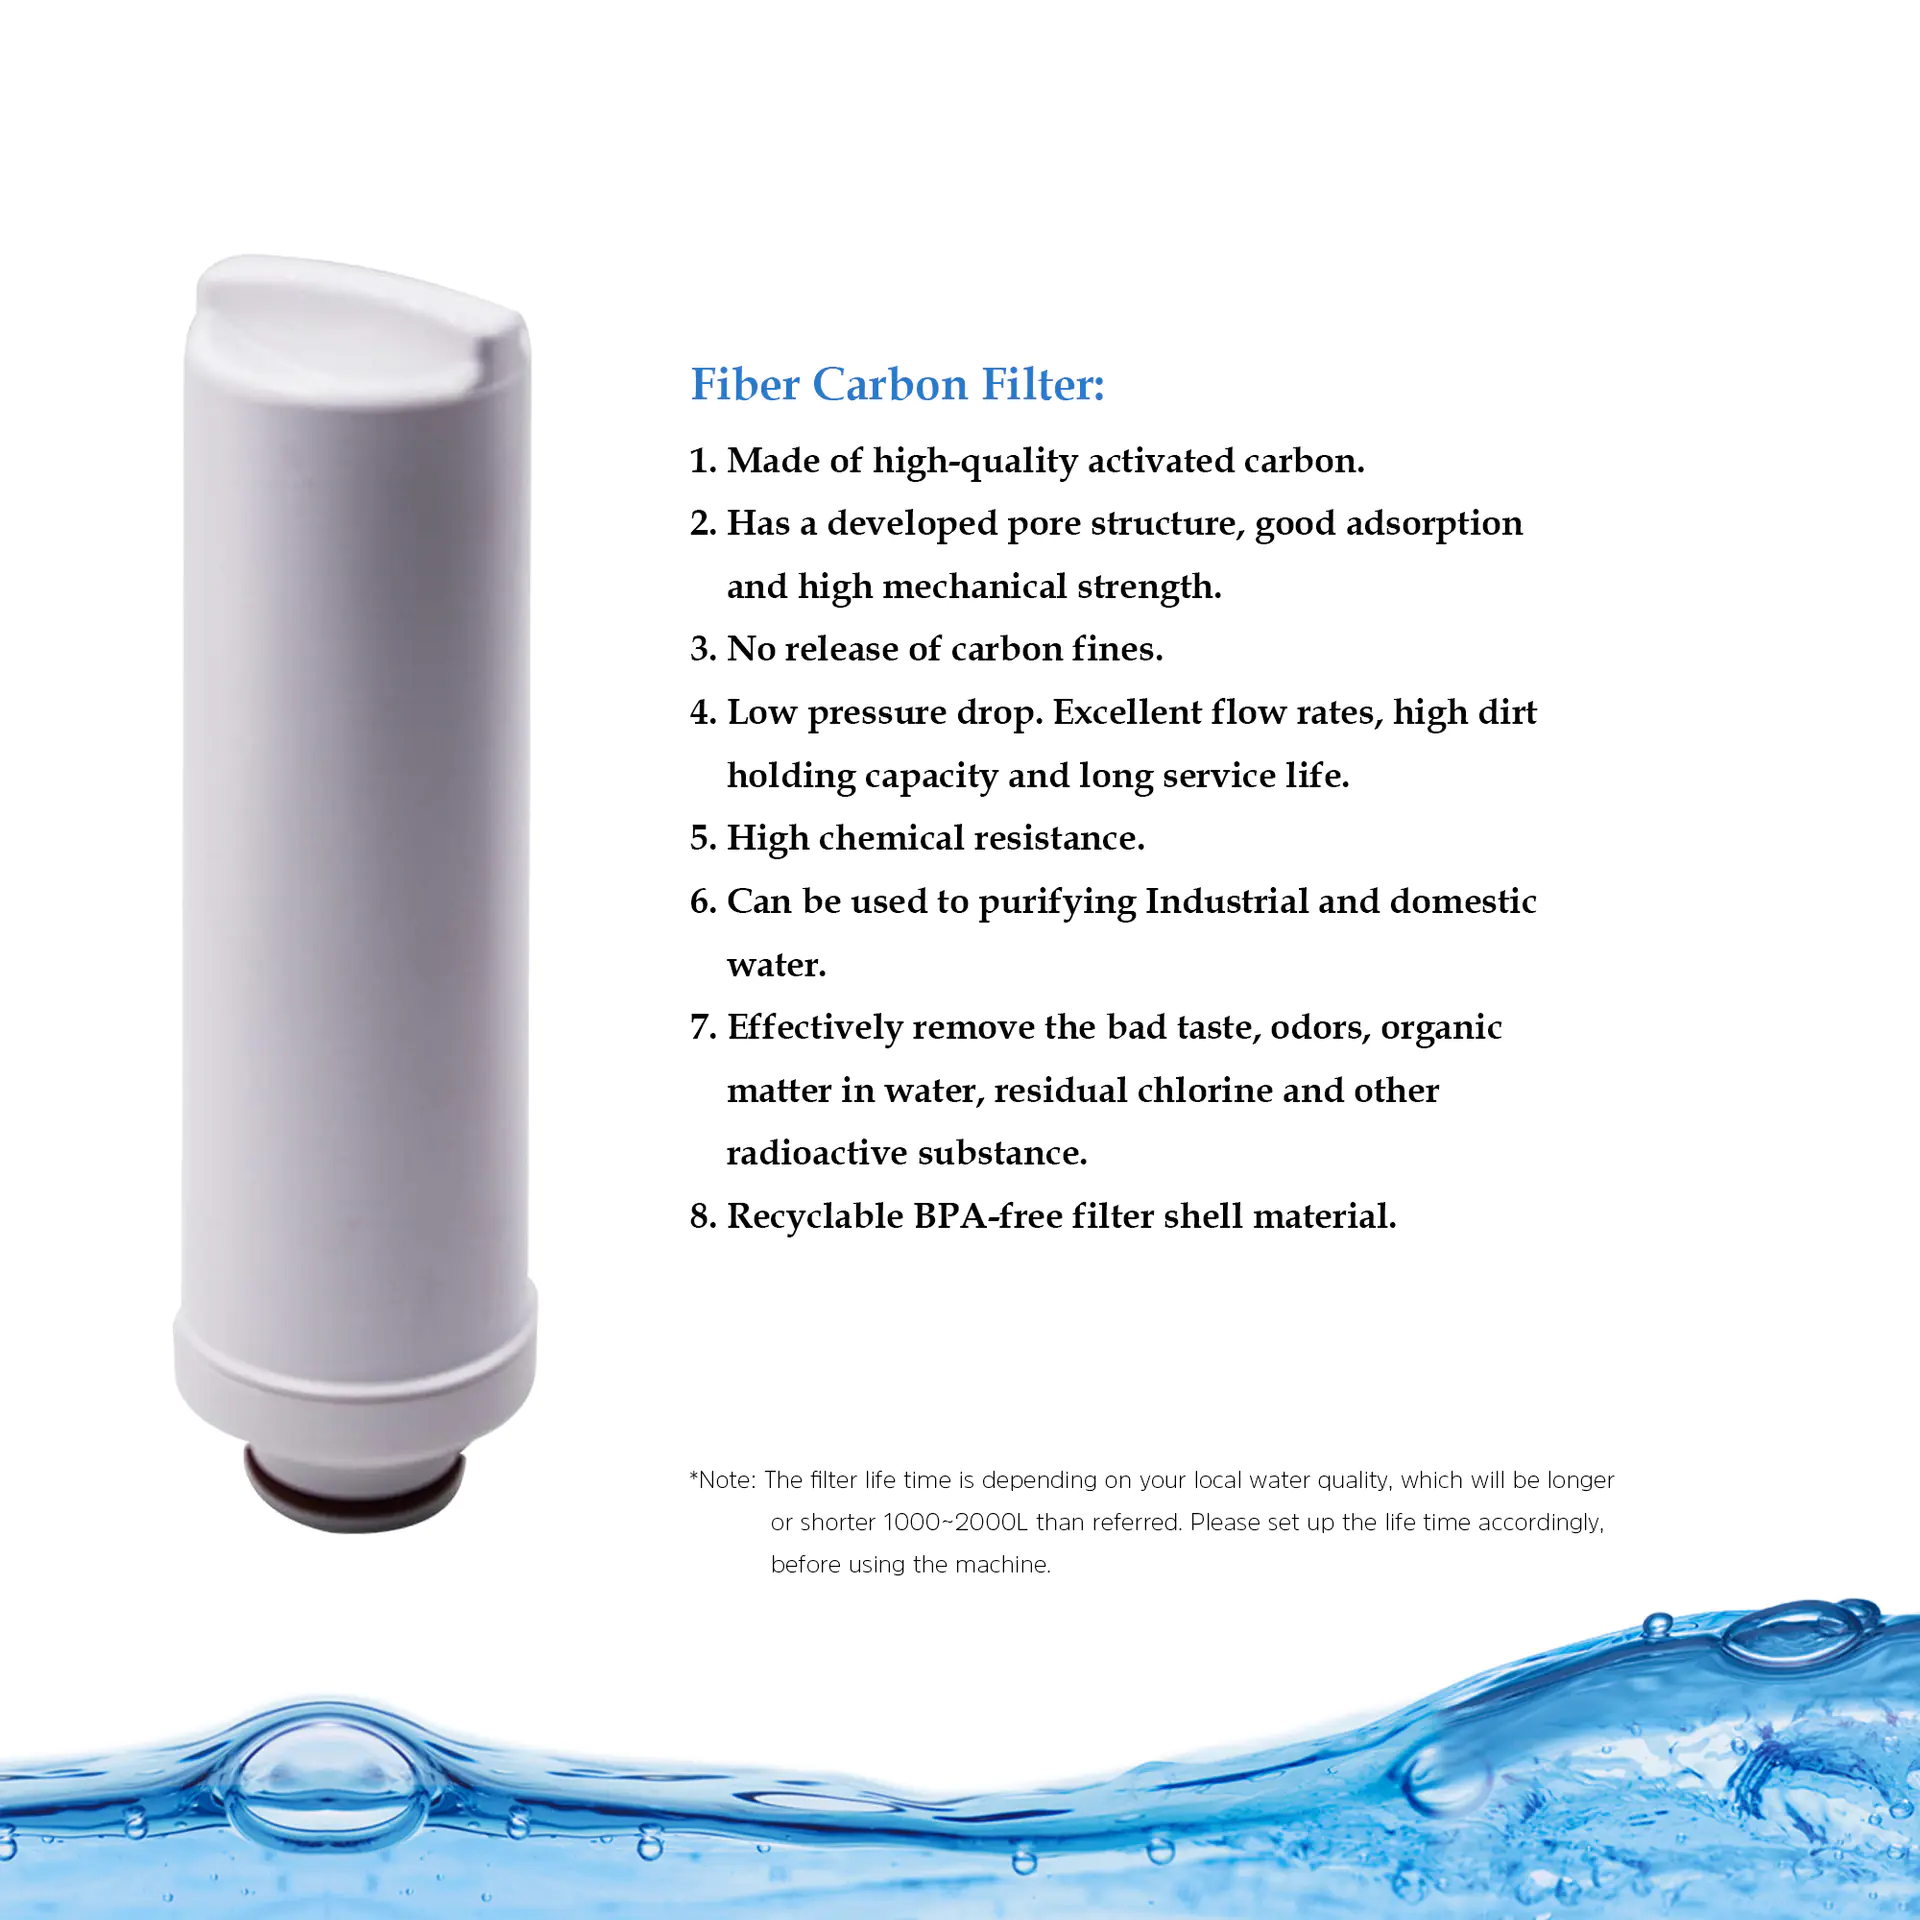 Internal water filter for water ionizer EHM-829